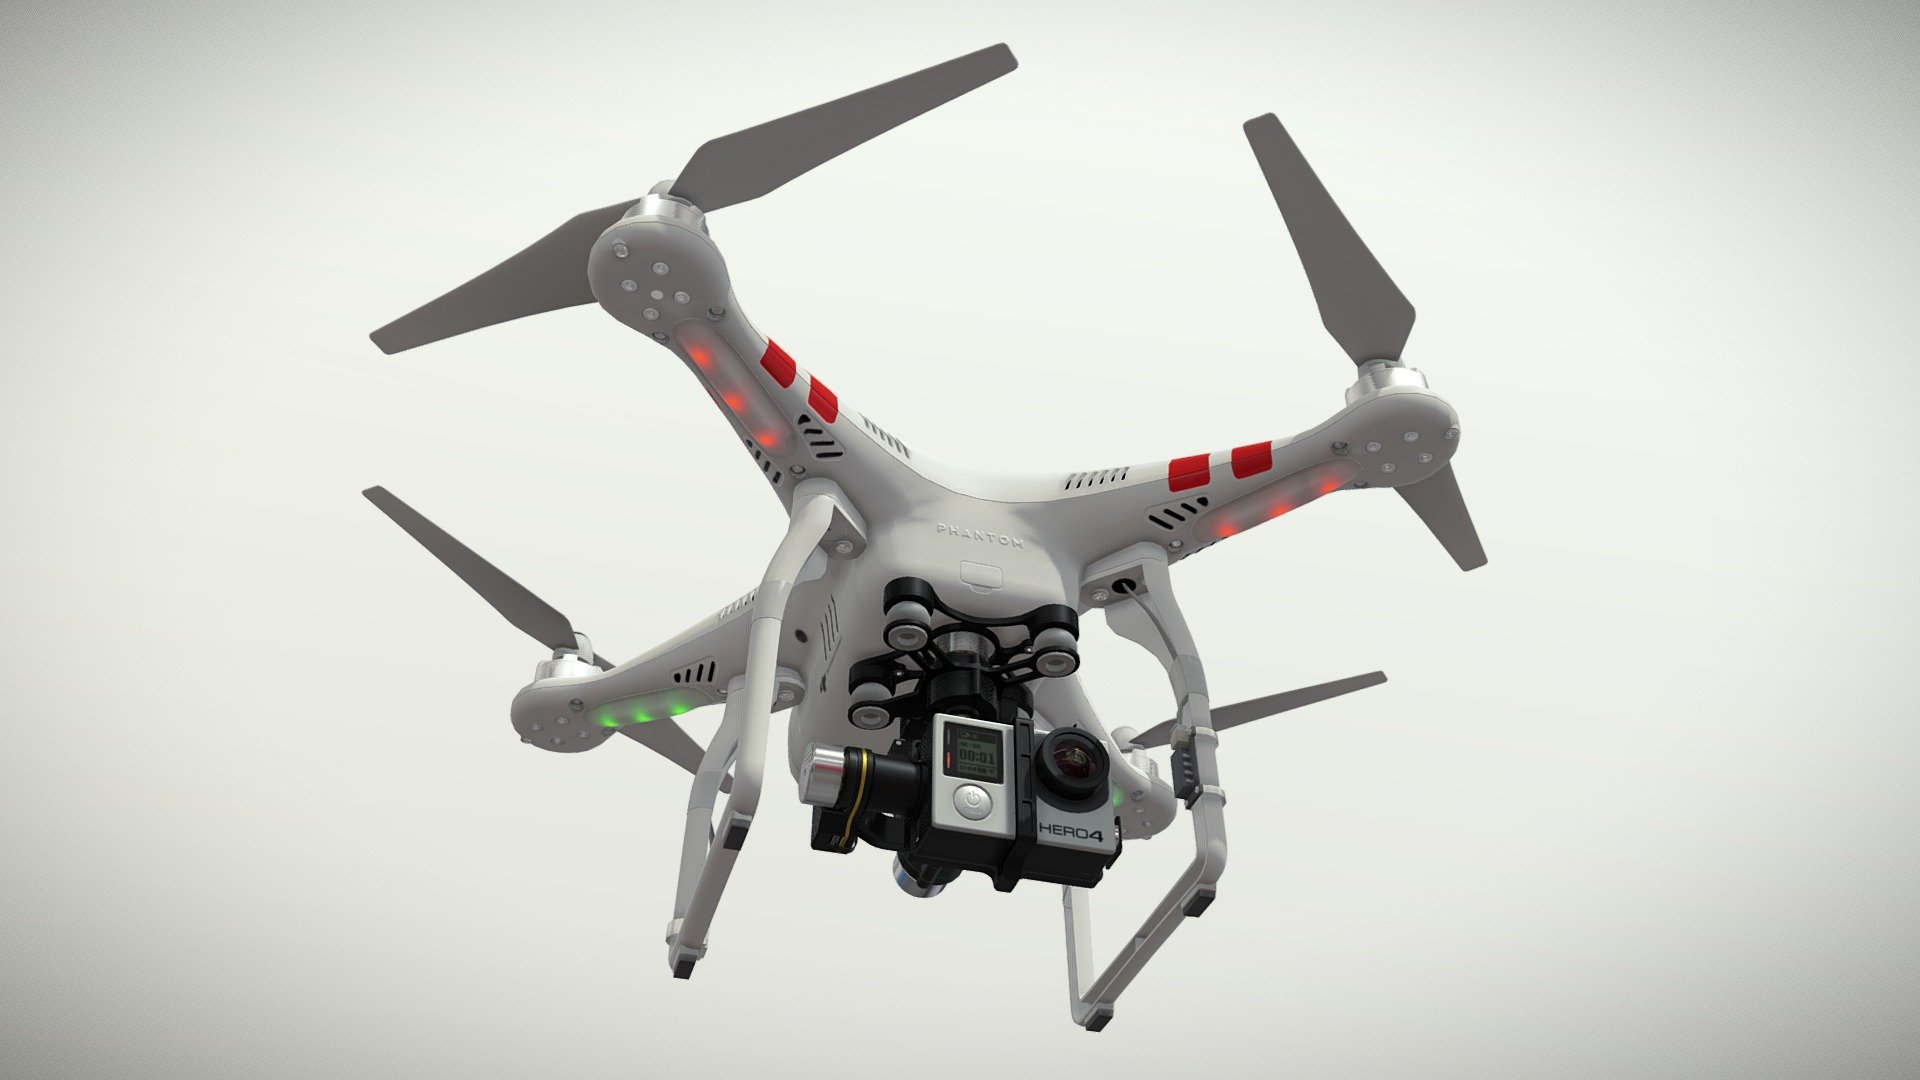 •   Let me present to you high-quality low-poly 3D model DJI Phantom 2 Quadcopter with Zenmuse H4-3D gimbal for GoPro Hero3-4 and GoPro HERO4 action camera. Modeling was made with ortho-photos of real quadcopter that is why all details of design are recreated most authentically.

•    Ease of use consists of a few meshes, it is low-polygonal and it has four materials.

•   The total of the main textures is 14. Resolution of all textures is from 2048 to 4096 pixels square aspect ratio in .png format. Also there is original texture file .PSD format in separate archive.

•   Polygon count of the model is – 24903.

•   The model has correct dimensions in real-world scale. All parts grouped and named correctly.

•   To use the model in other 3D programs there are scenes saved in formats .fbx, .obj, .DAE, .max (2010 version).

Note: If you see some artifacts on the textures, it means compression works in the Viewer. We recommend setting HD quality for textures. But anyway, original textures have no artifacts 3d model